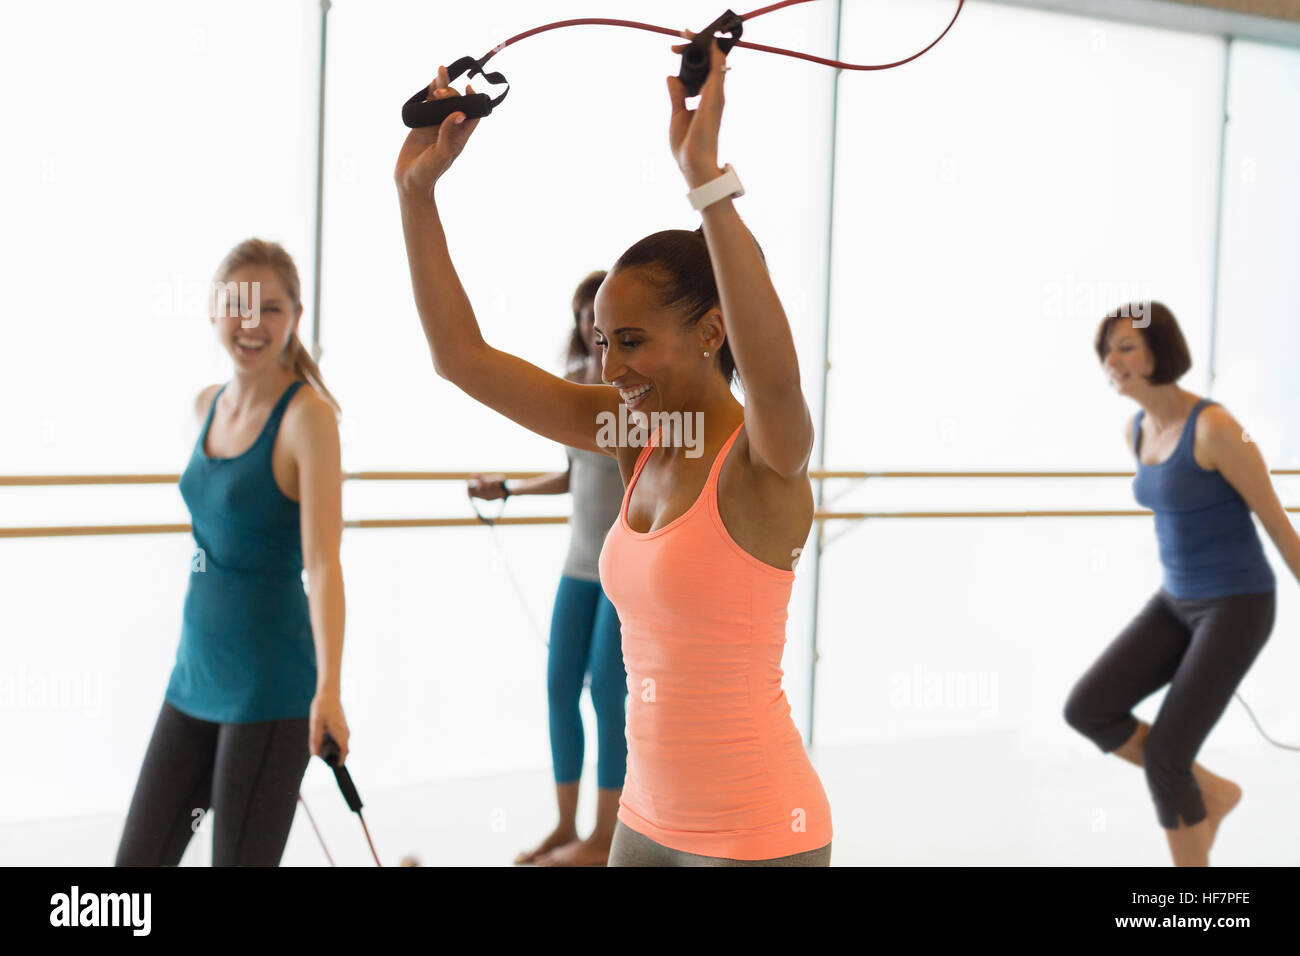 jump rope fitness class